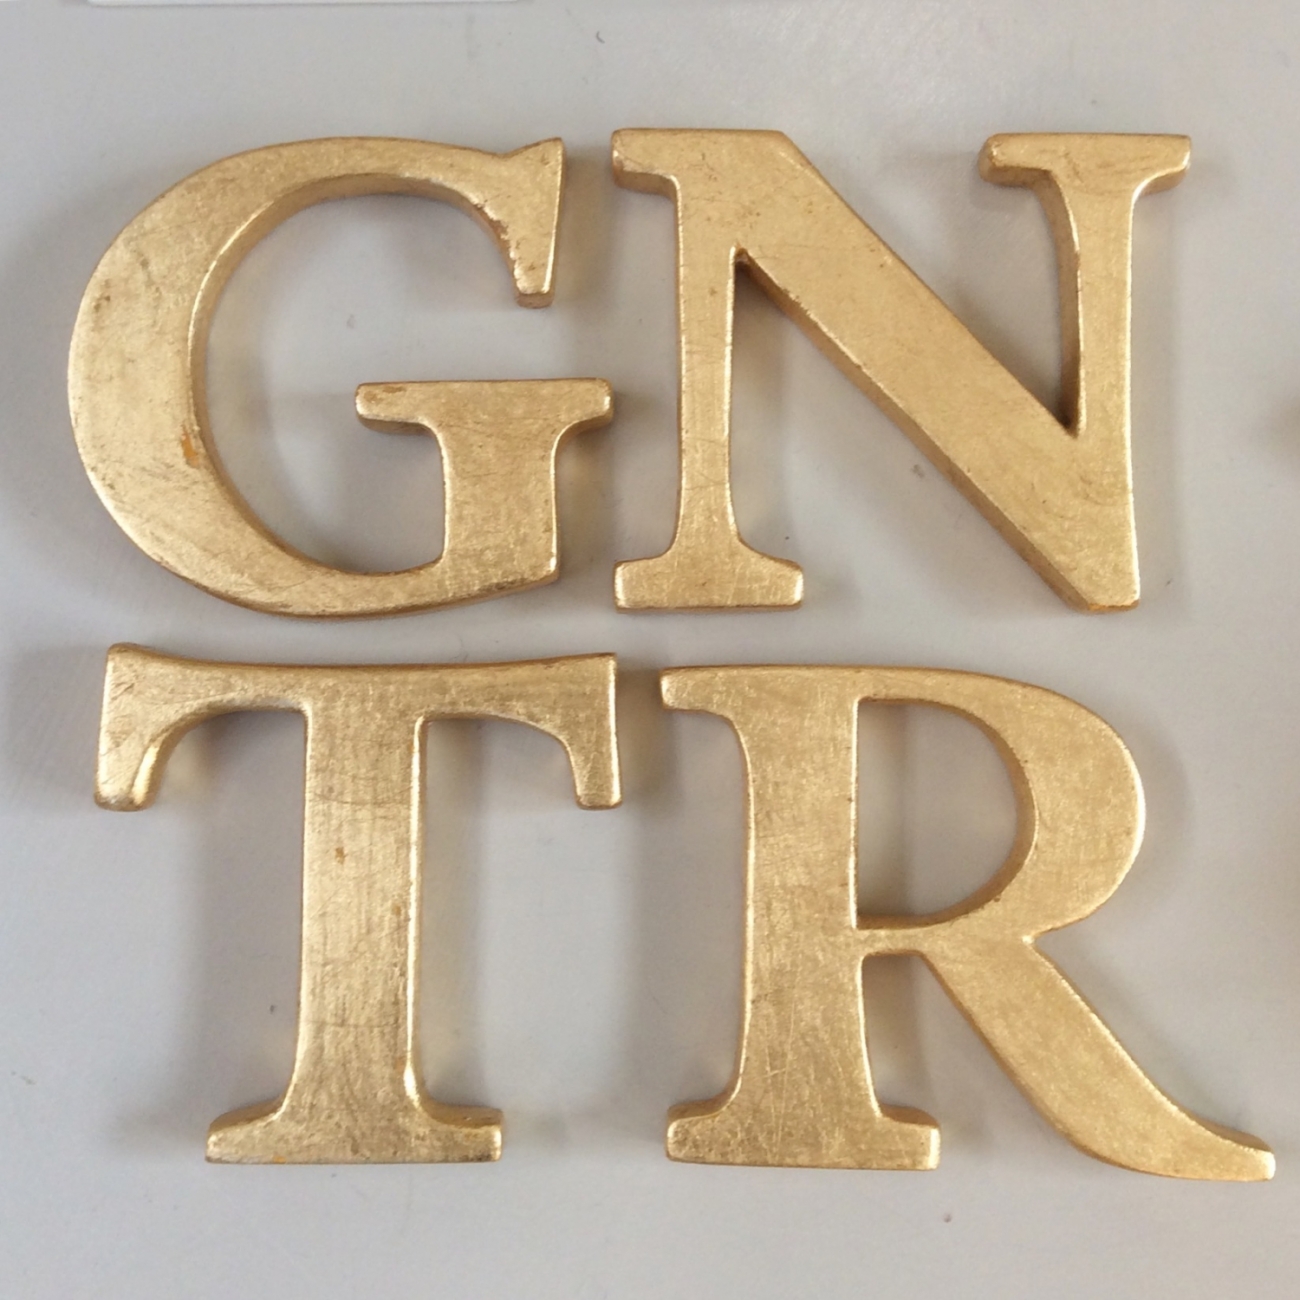 Gilded wooden letters Jane Harman storage and furniture restoration in Florence